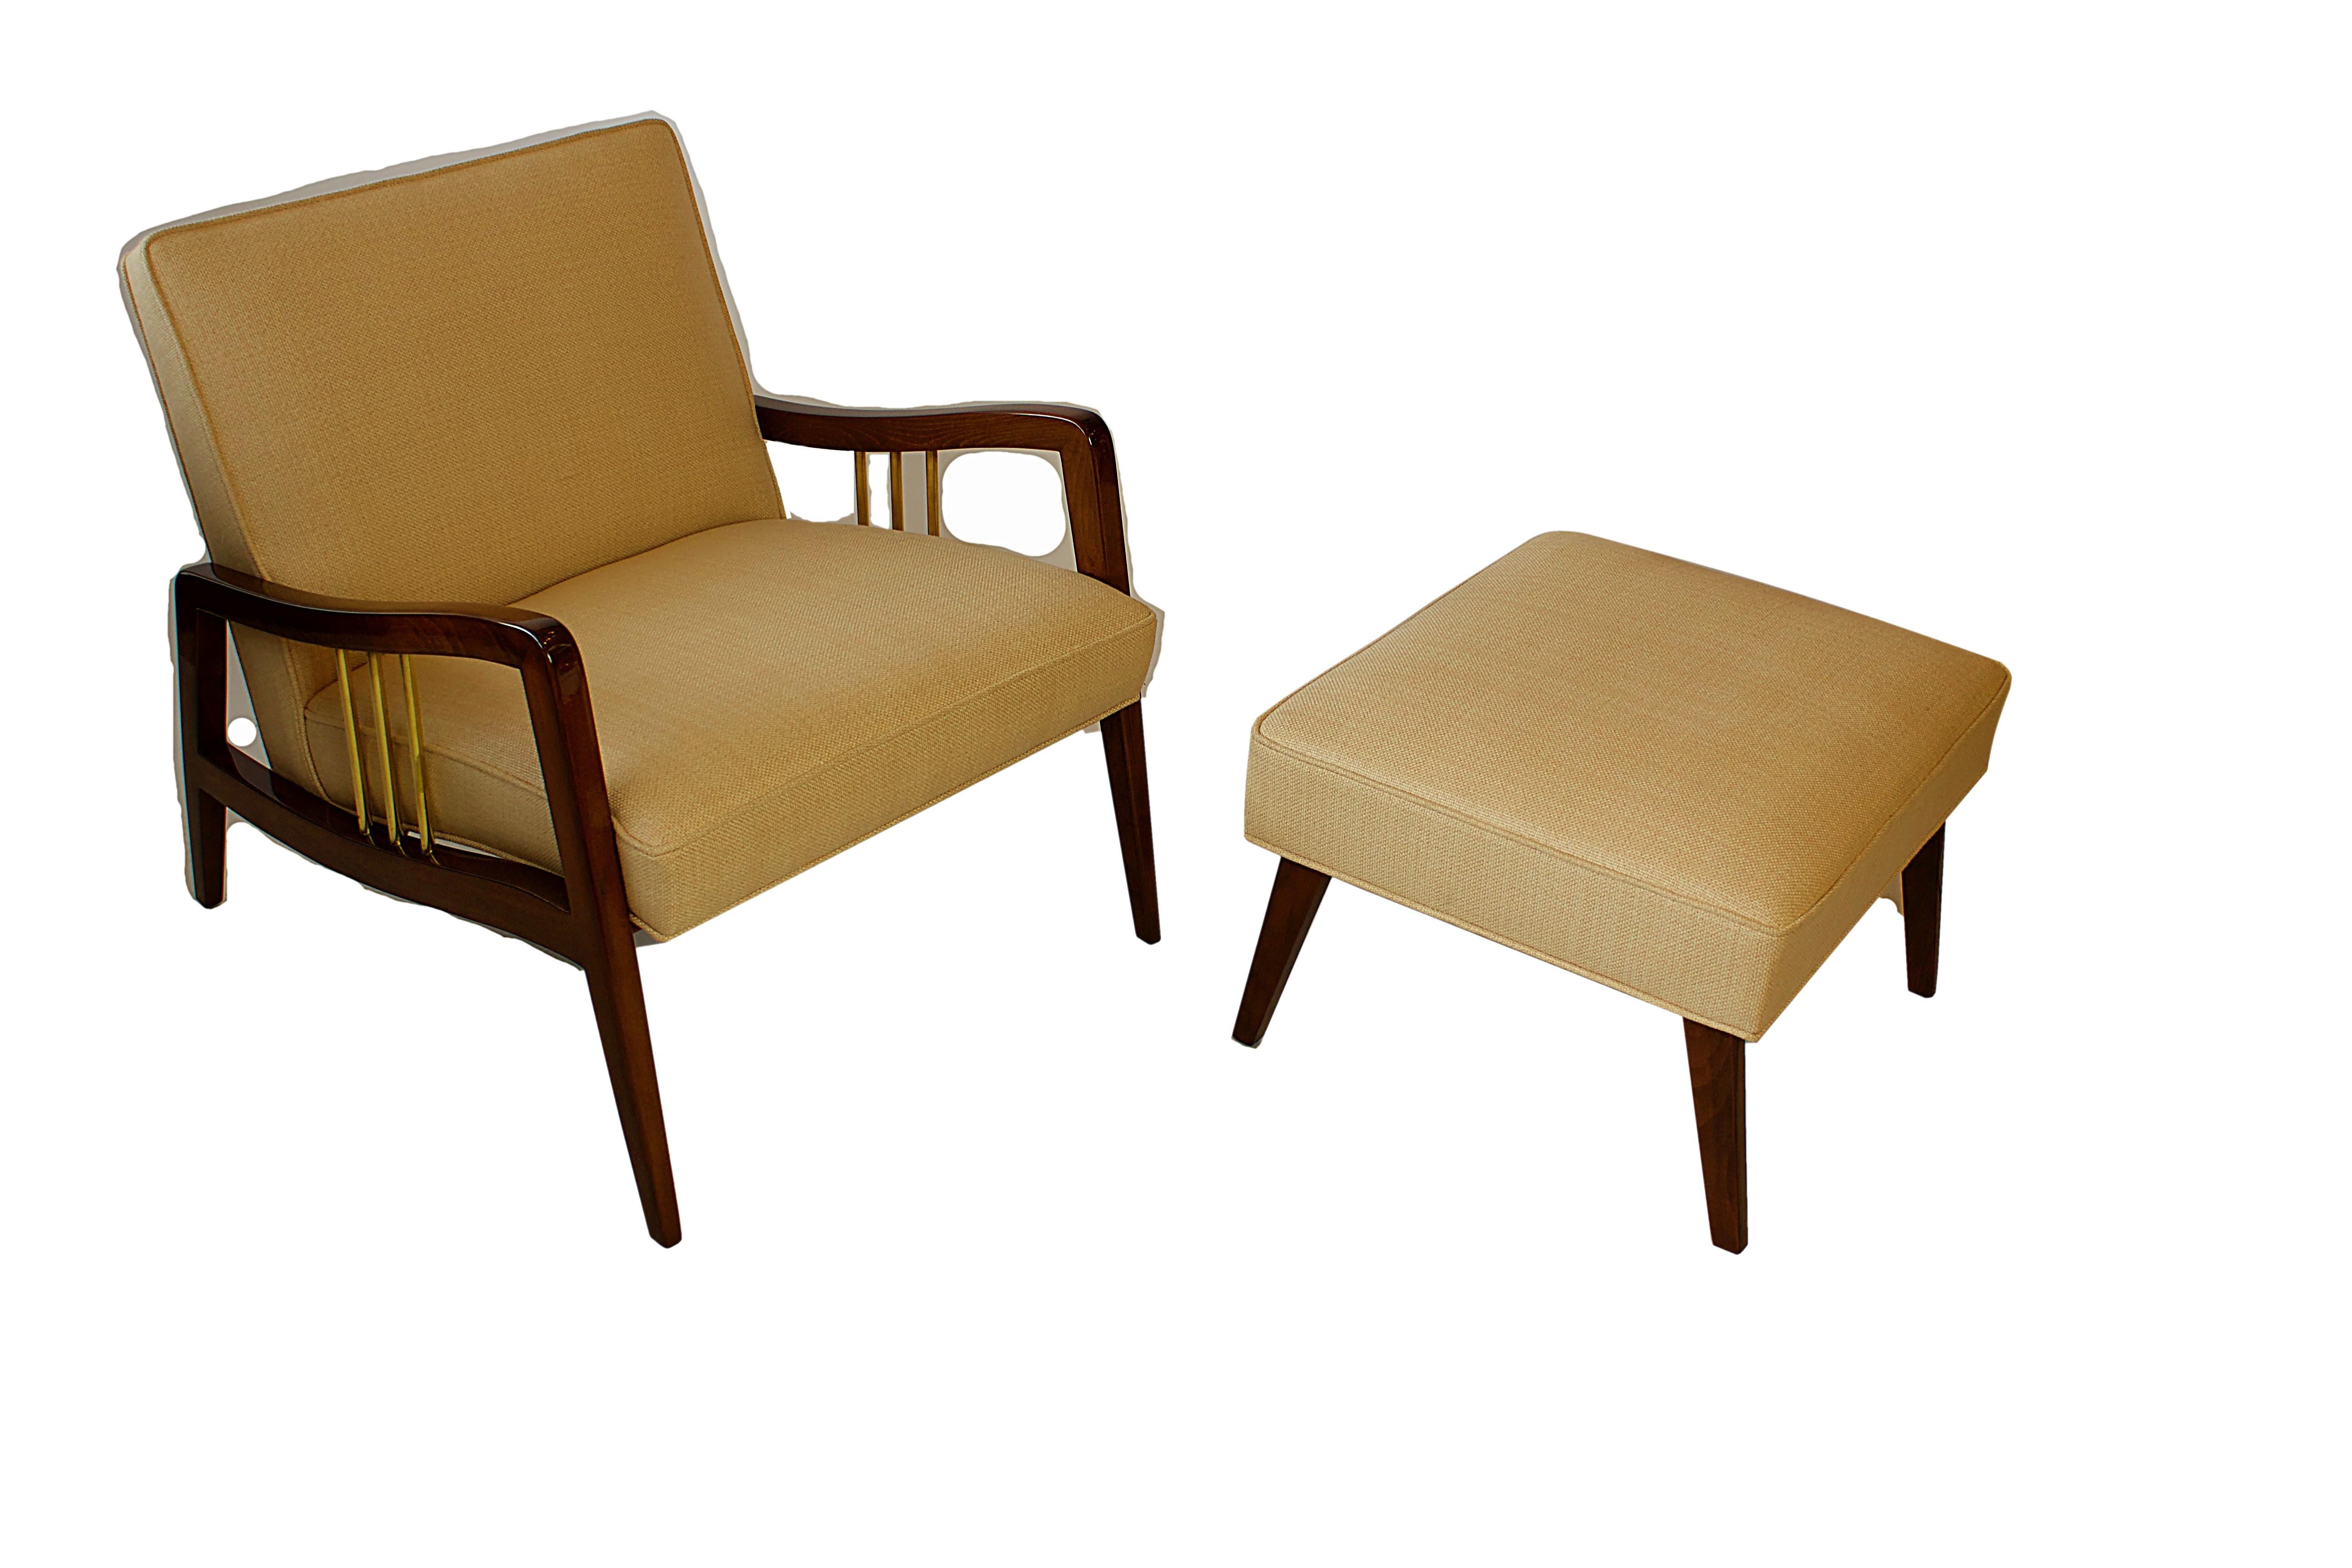 Italian Modern Mahogany and Brass Lounge Chair and Ottoman, Dassi 1